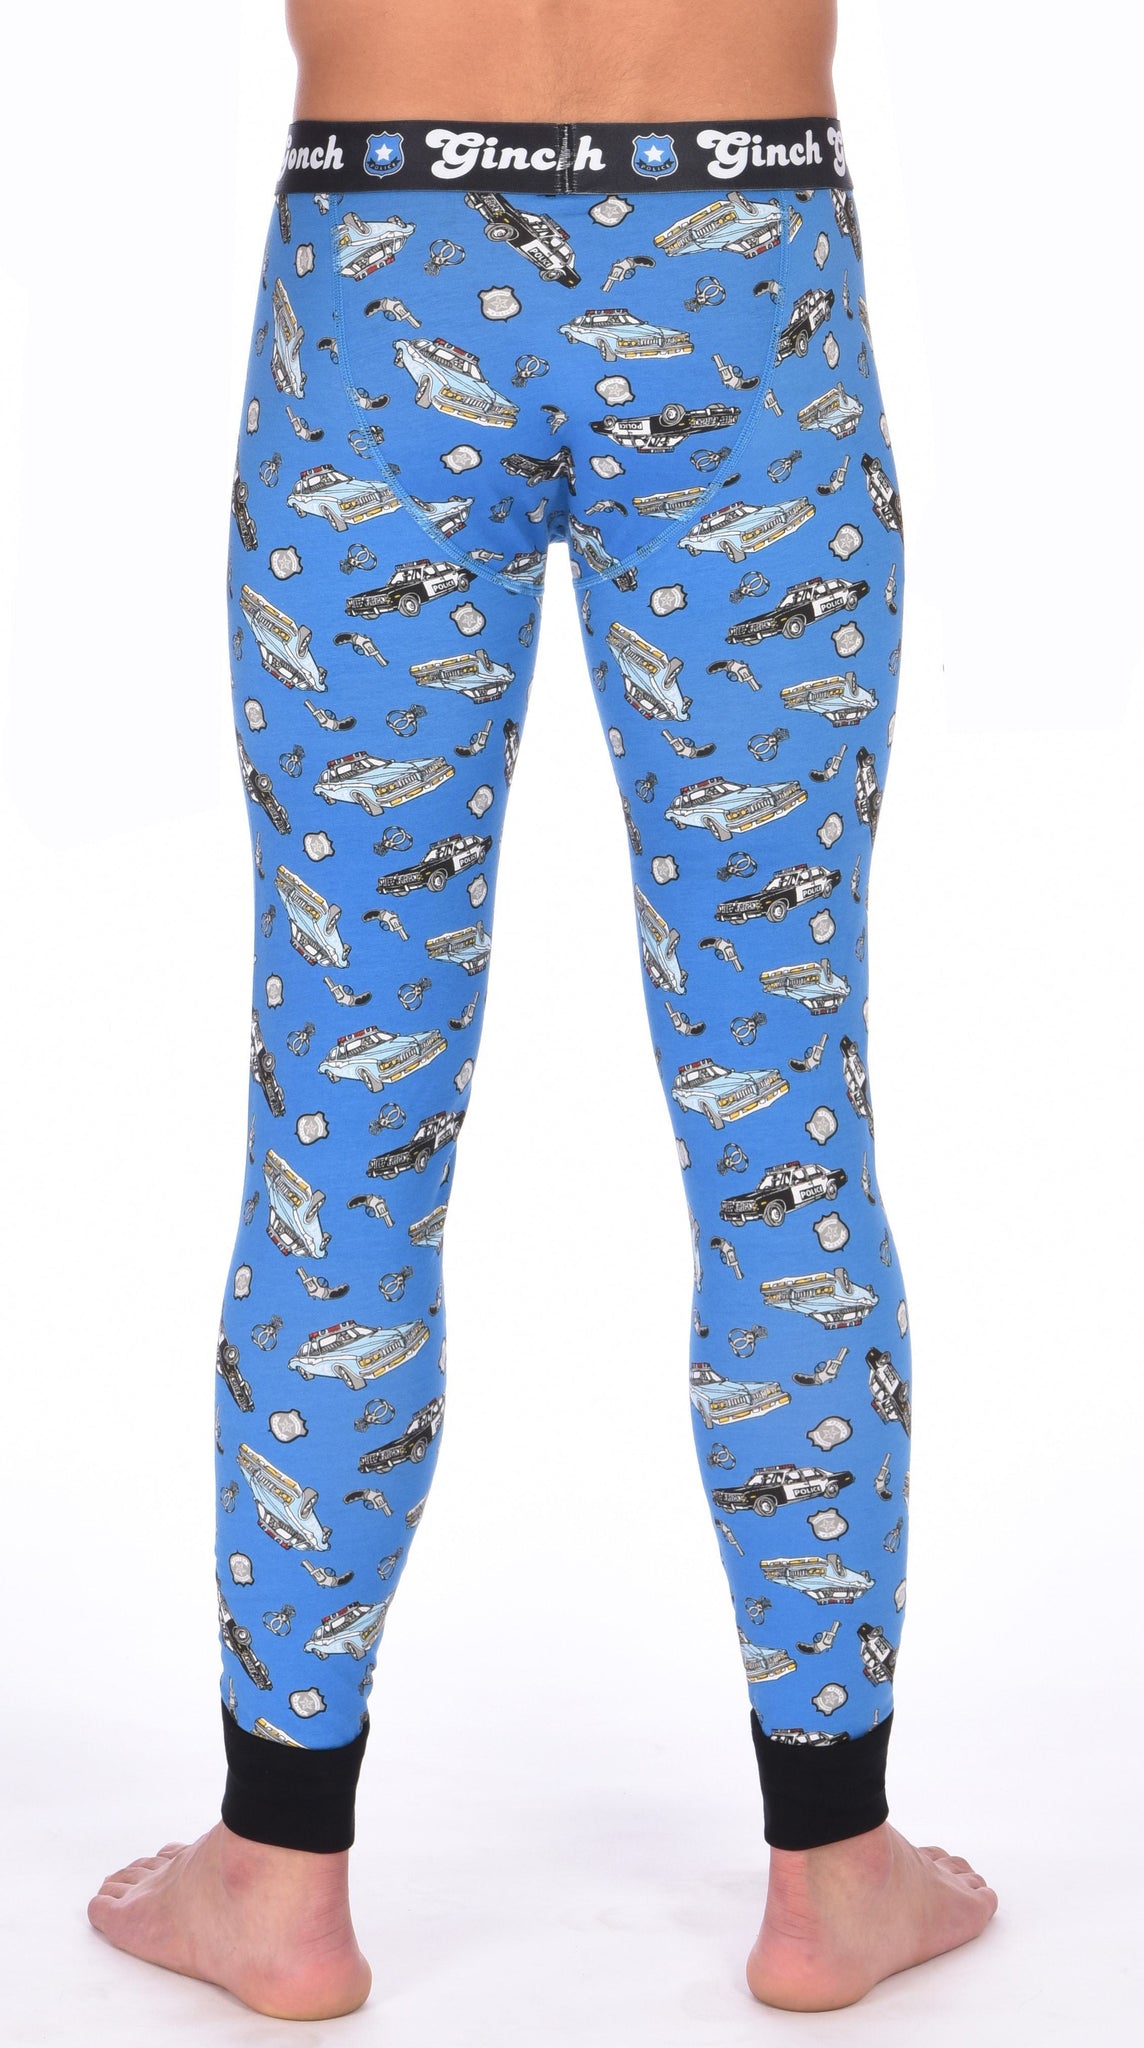 Ginch Gonch GG Patrol long john legging men's long underwear y front blue fabric with cop cars, badges, hand cuffs, and guns. Black trim and black printed waistband back